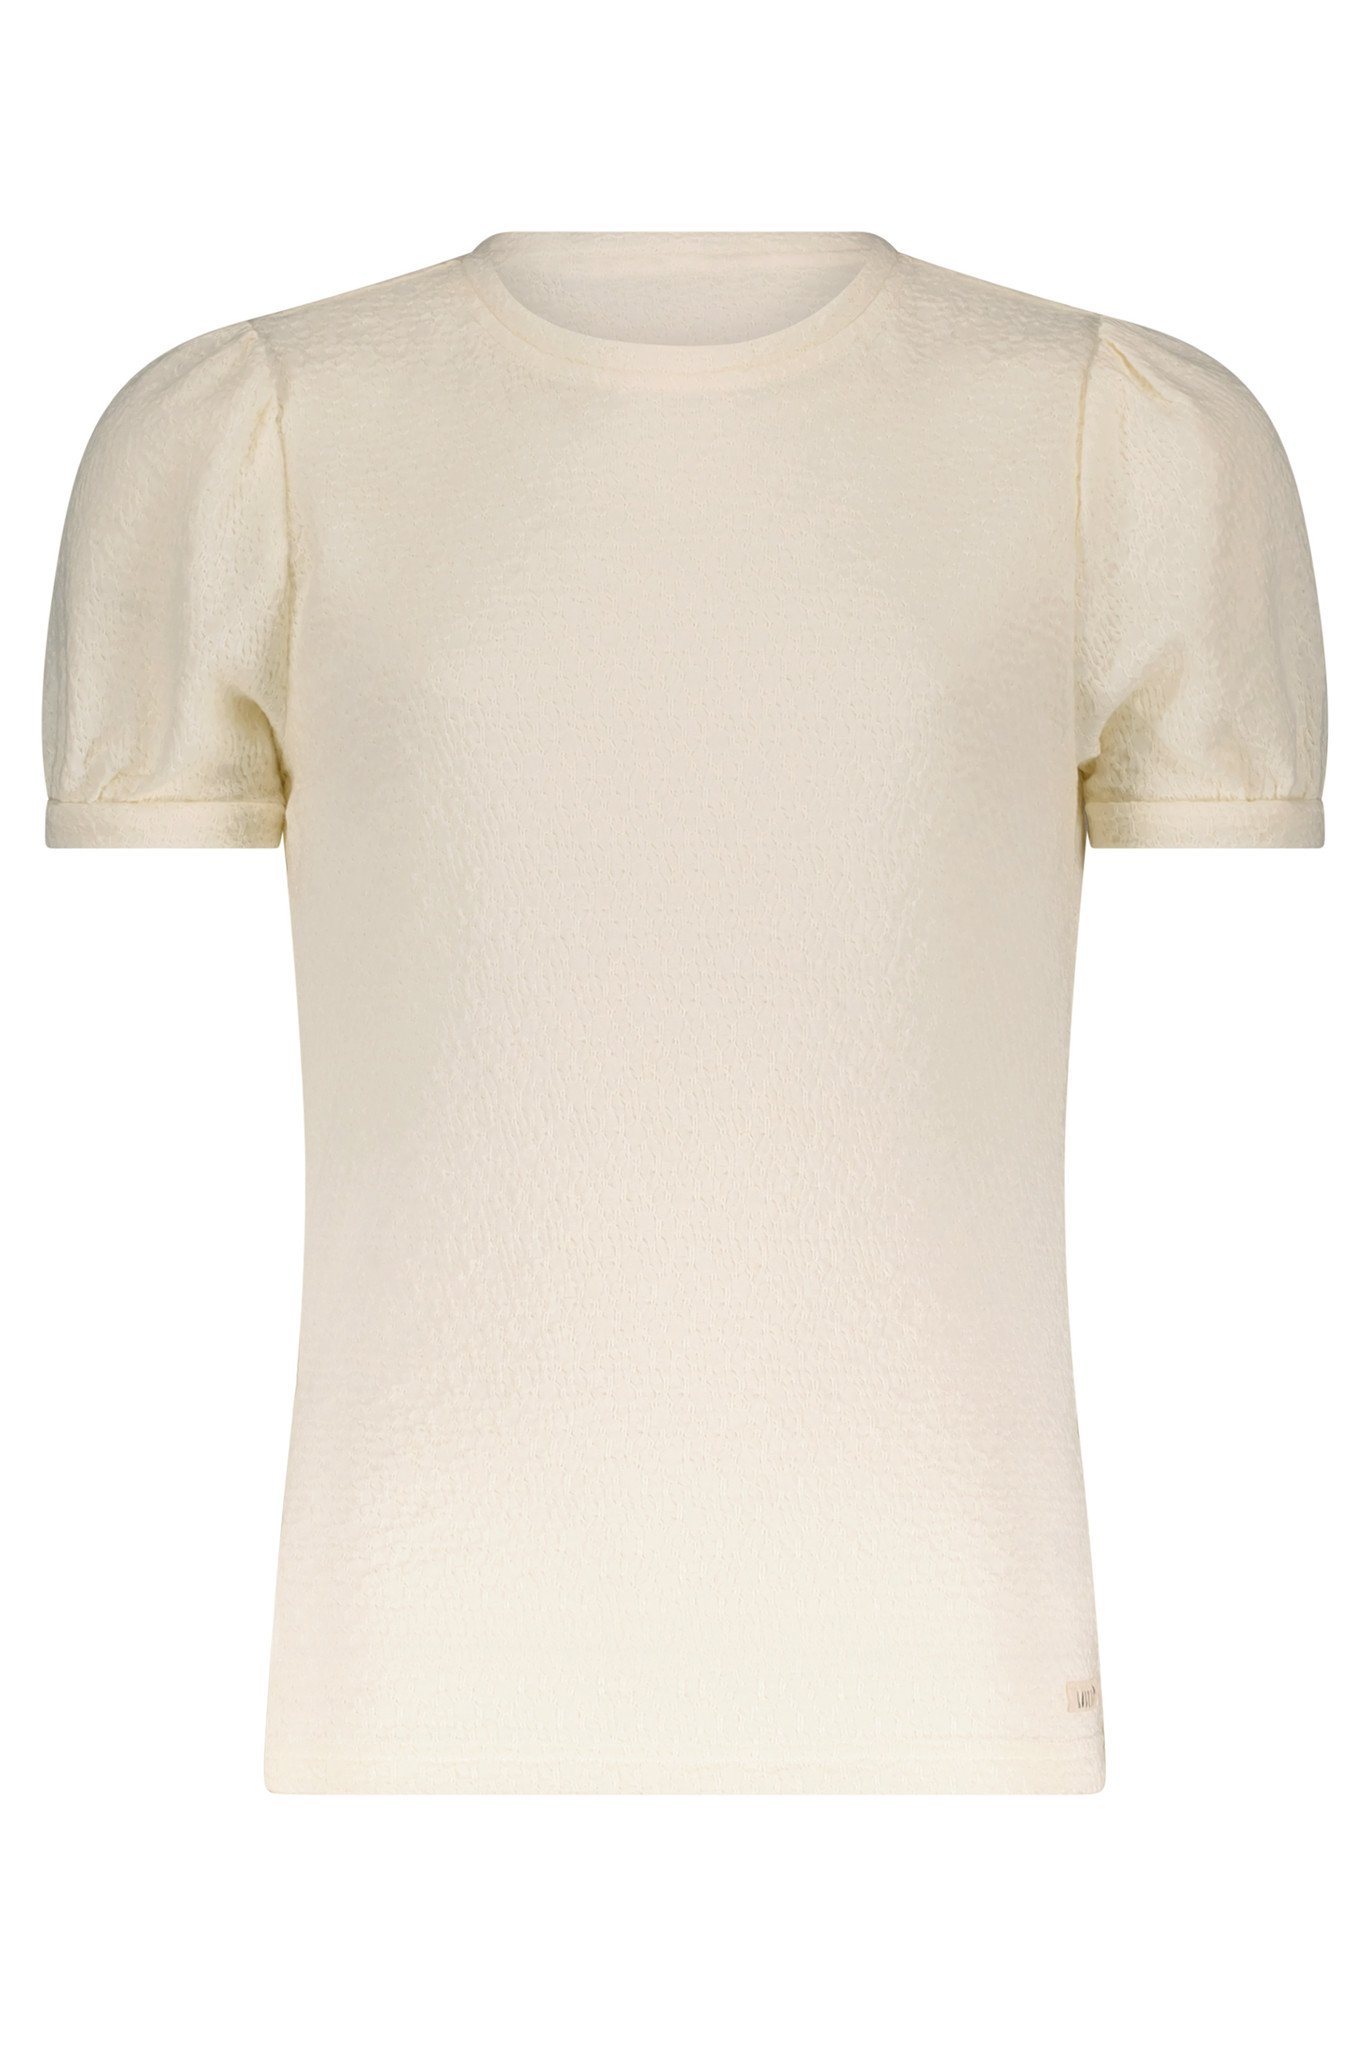 NoBell' - T-Shirt - Pearled Ivory - Maat 146-152